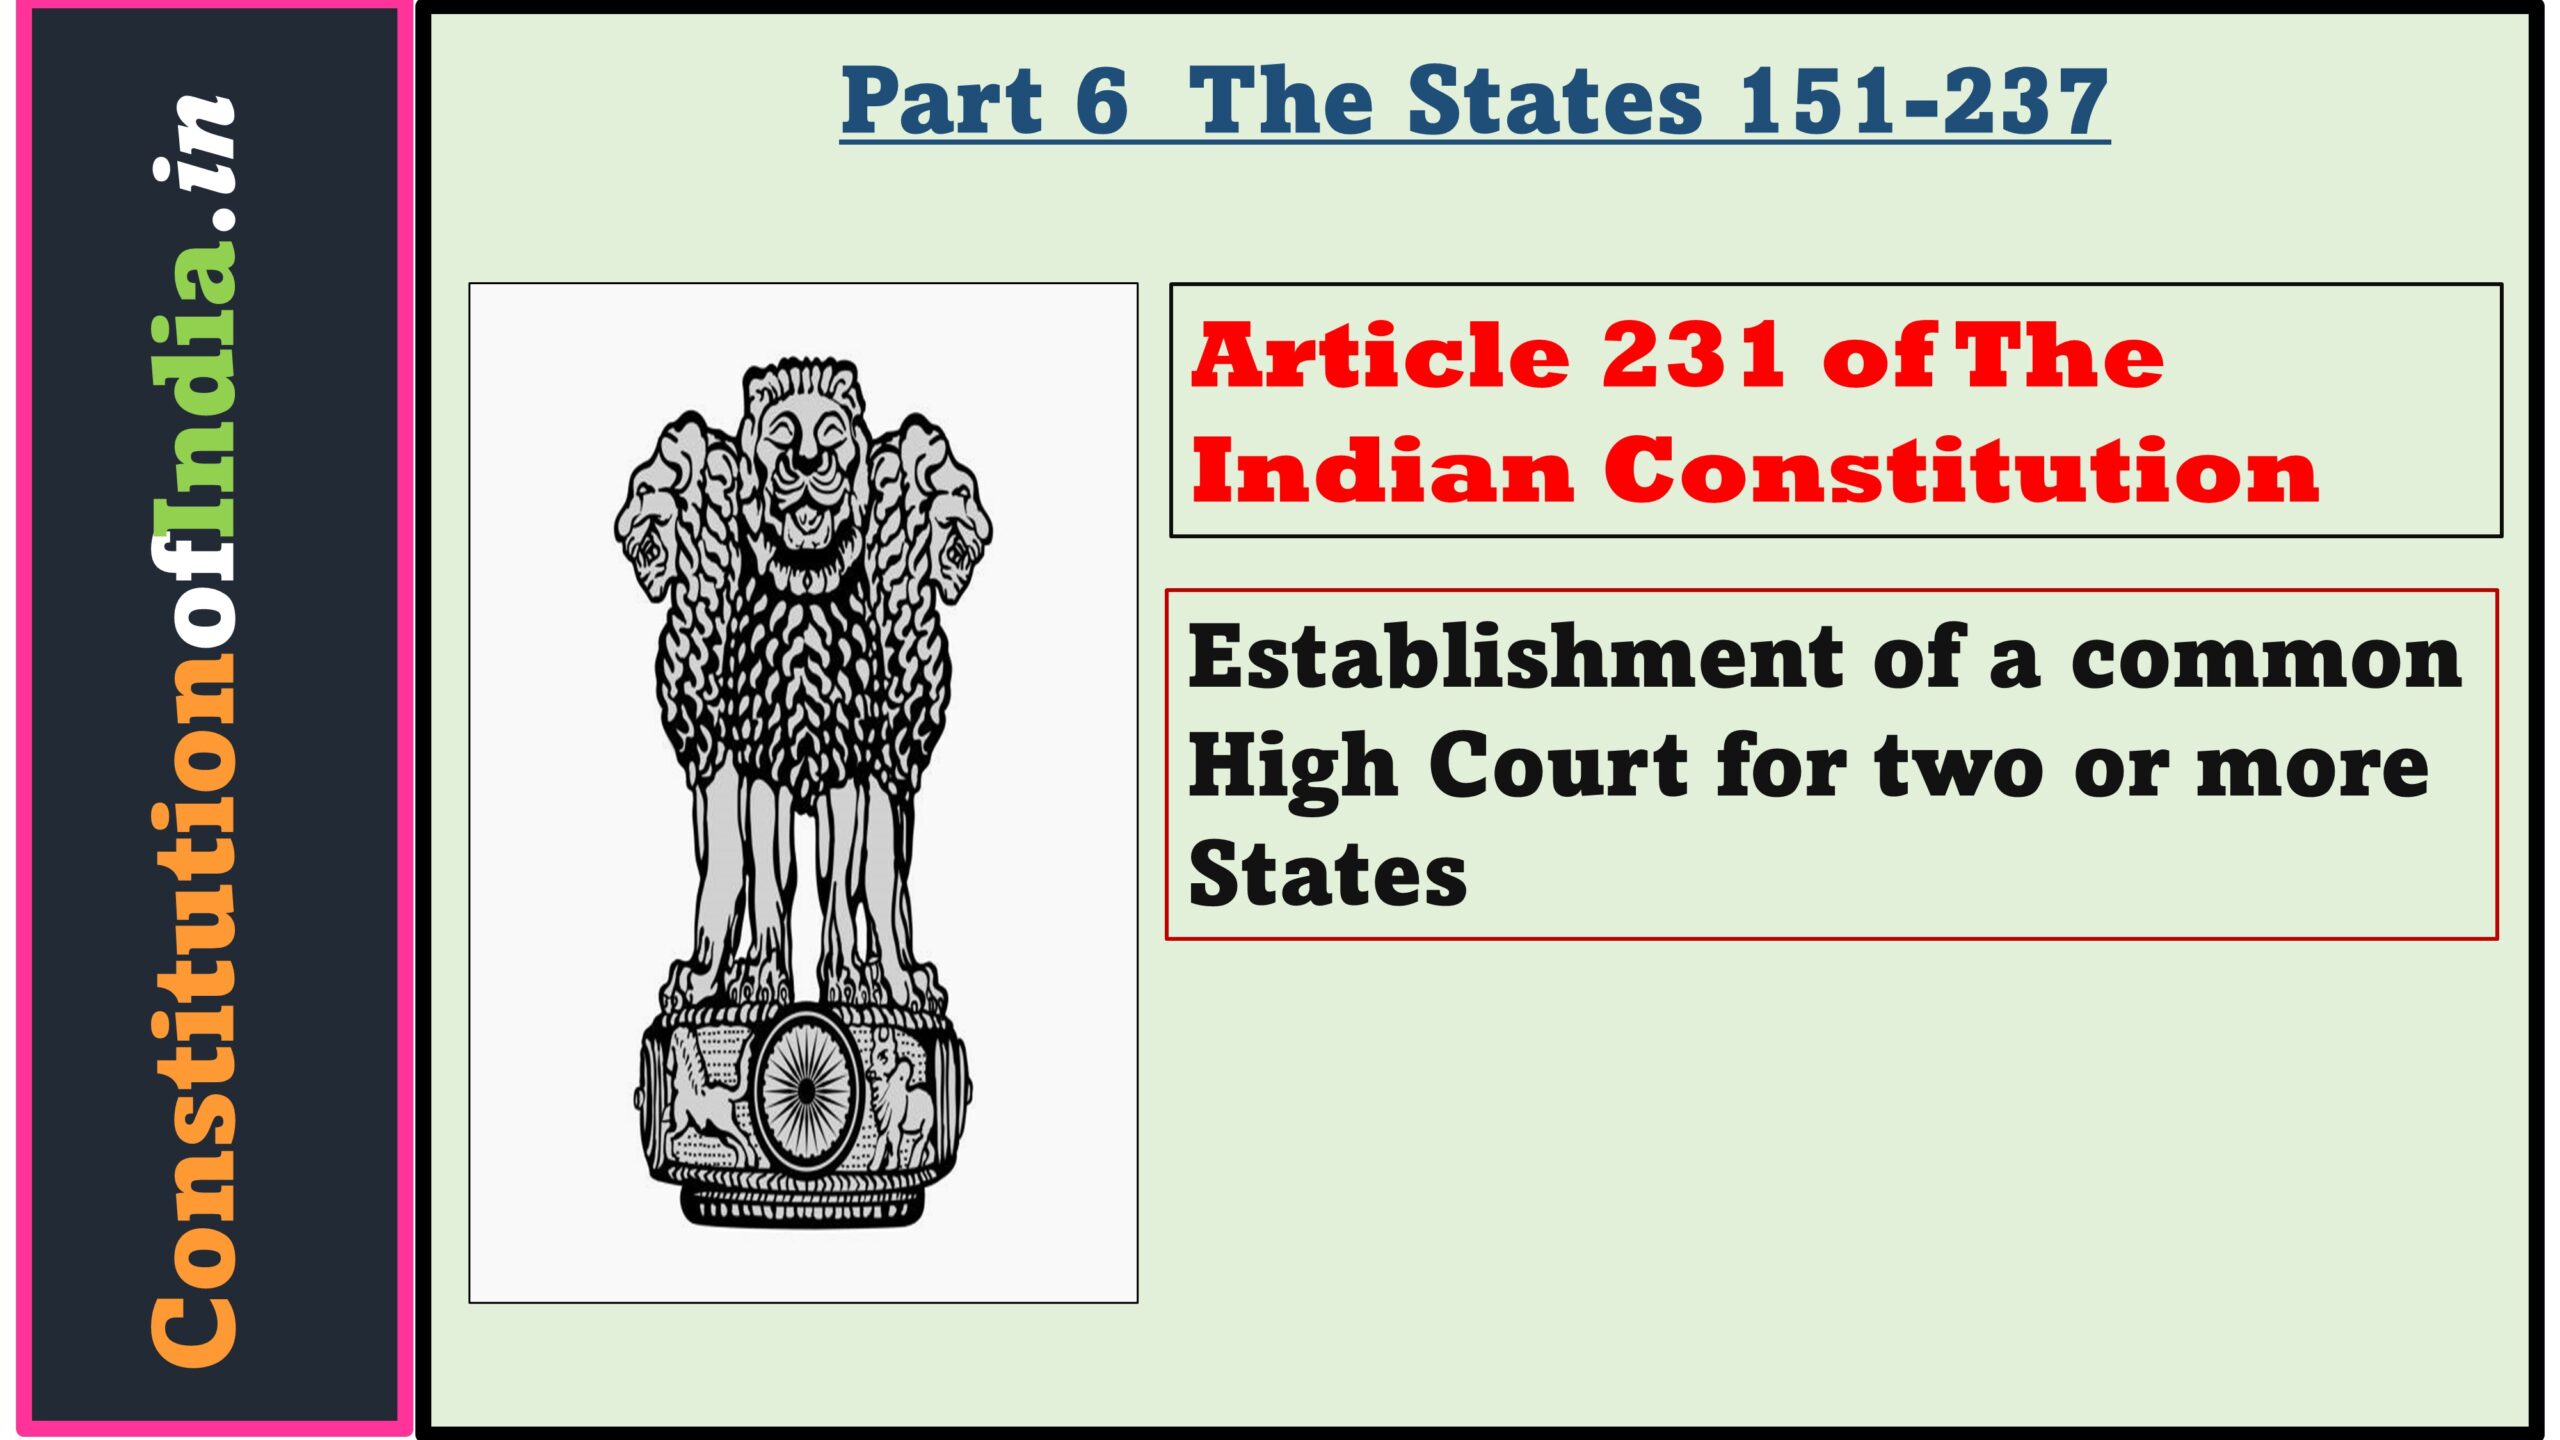 Article 231 of The Indian Constitution